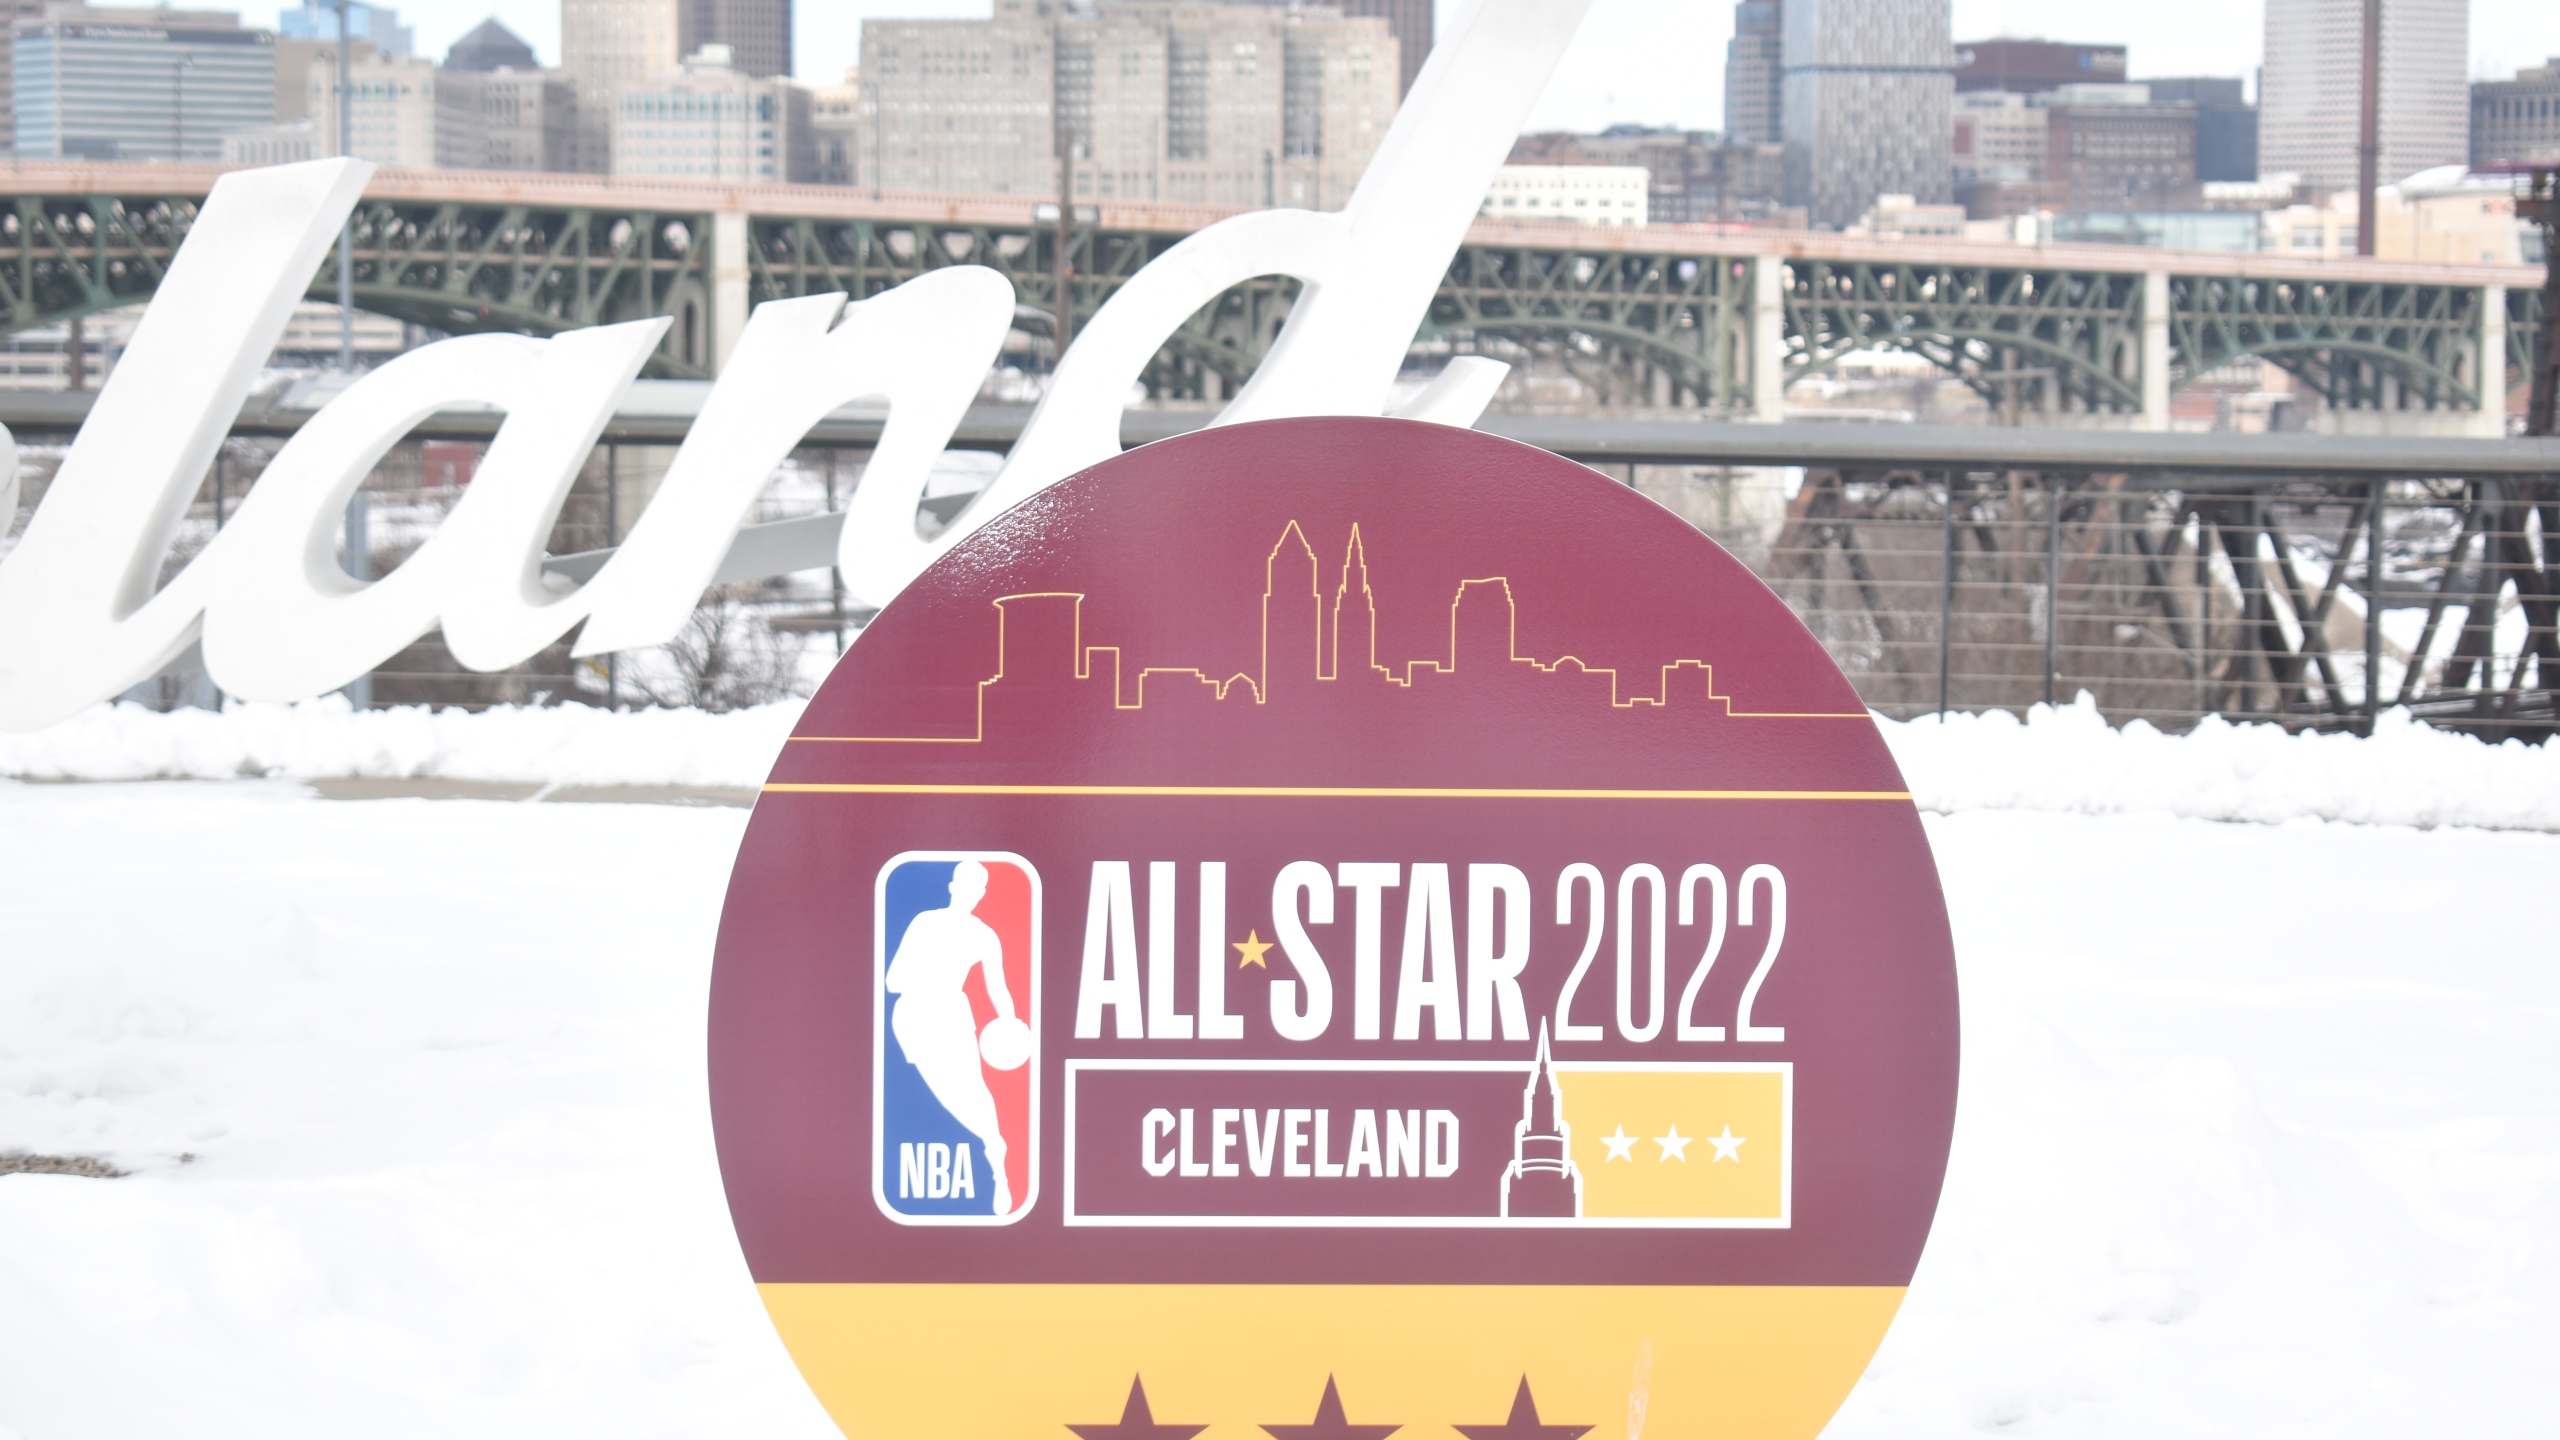 NBA All Star 2022 Cleveland Schedule Of Events